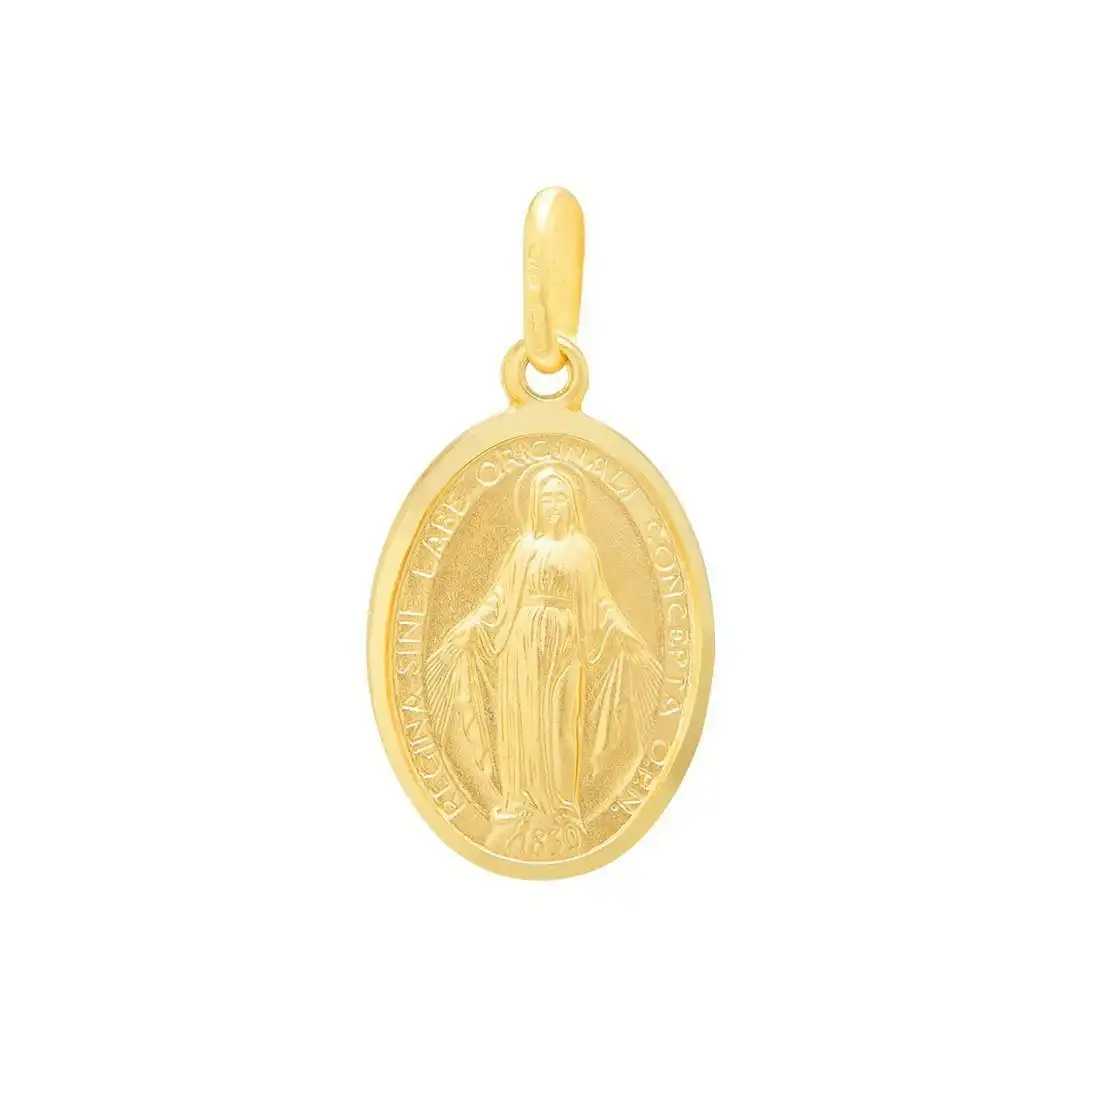 Religious Oval Madonna Virgin Mary Pendant in 9ct Yellow Gold